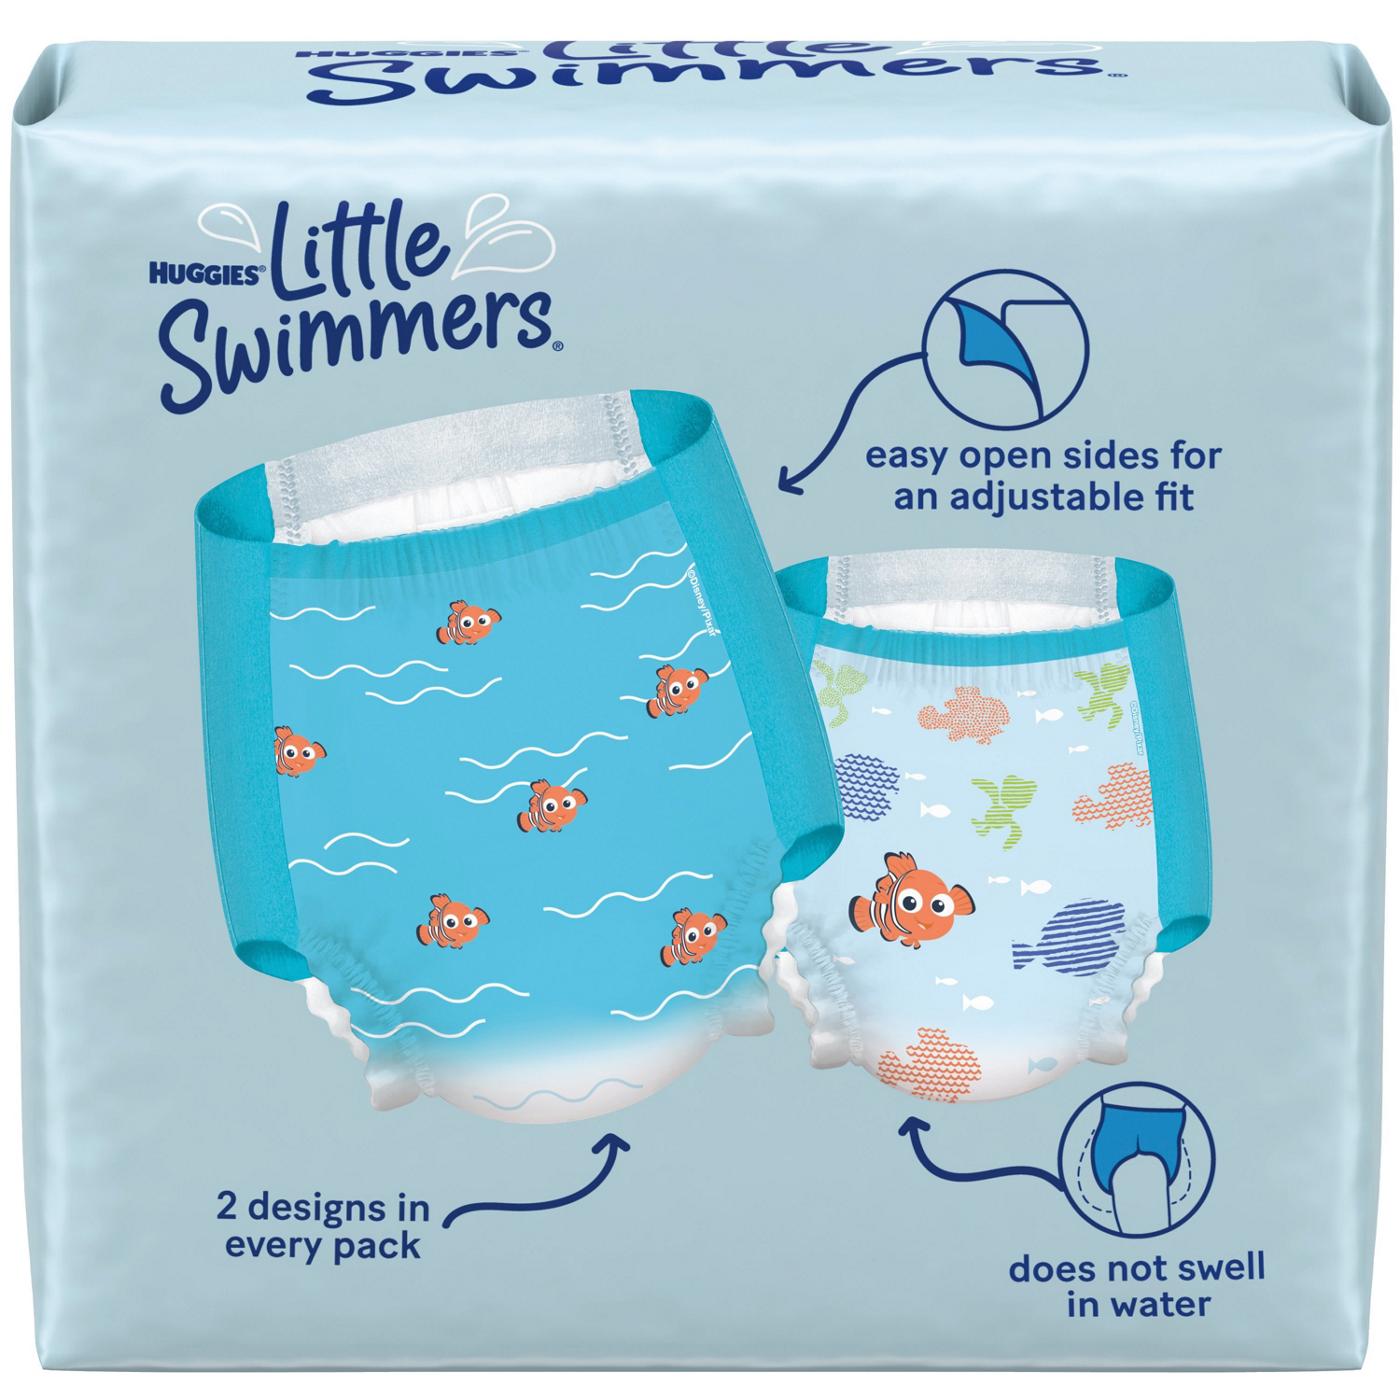 Huggies Little Swimmers Disposable Swim Diapers - Size 4; image 5 of 6